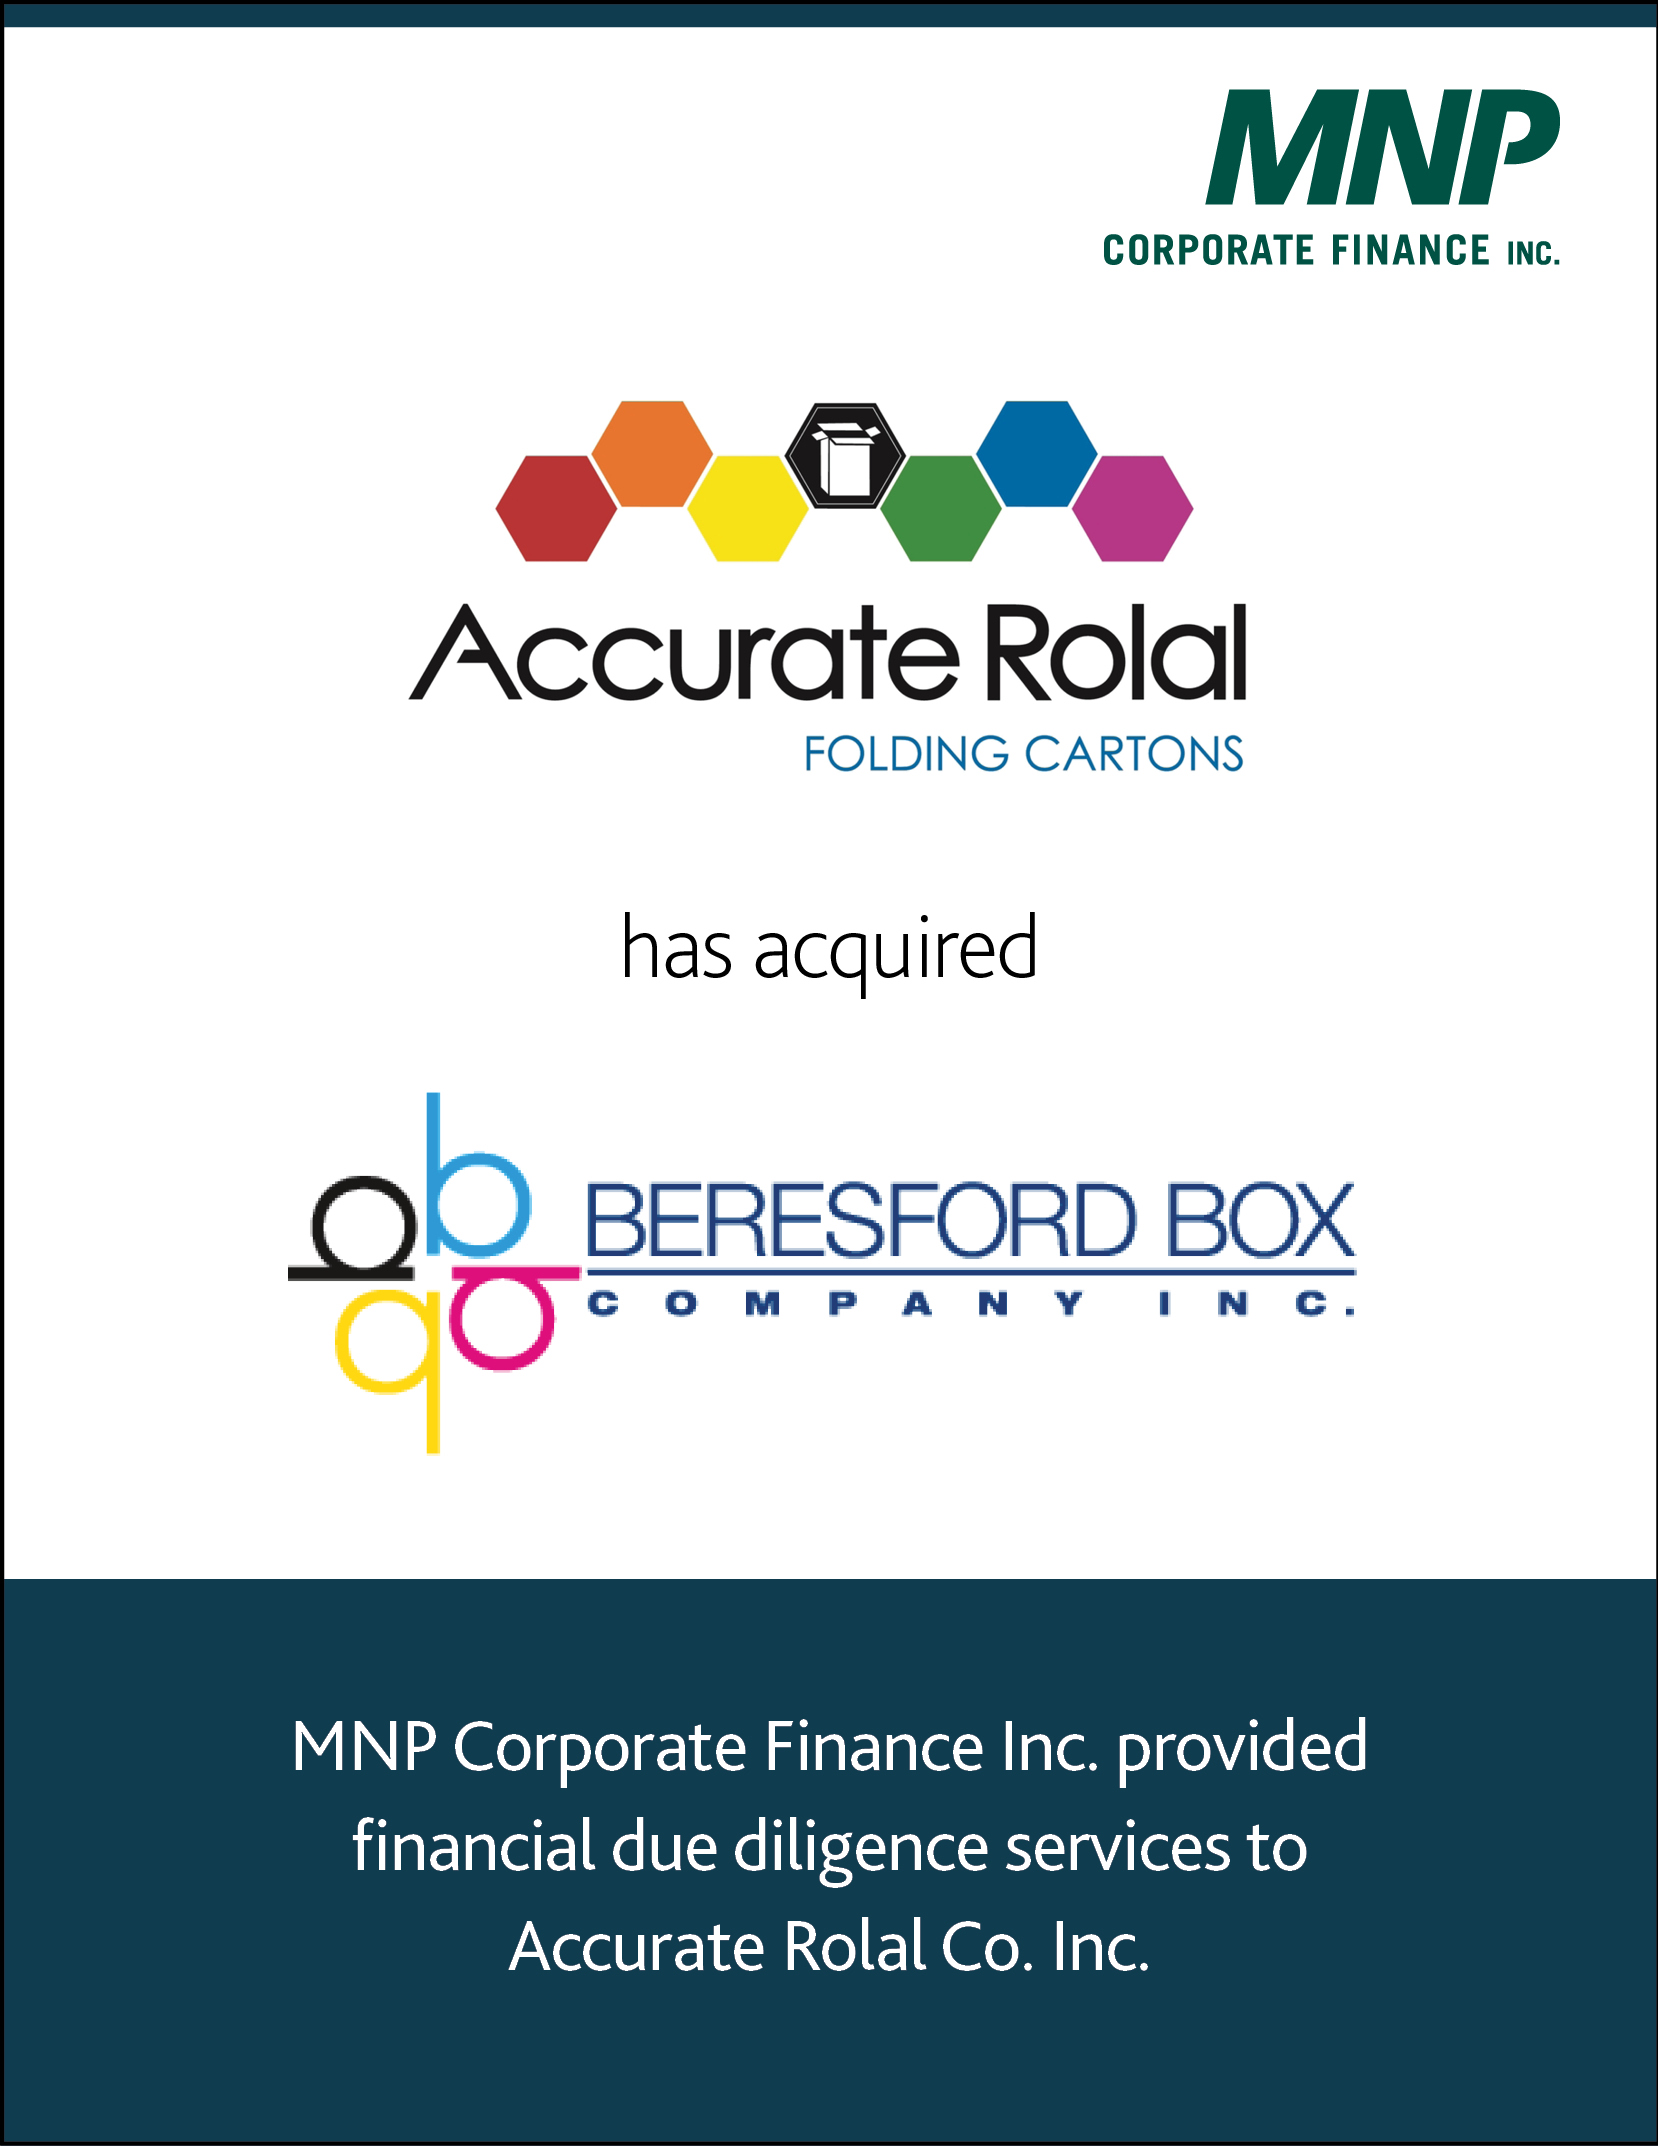 Accurate Rolal Co. Inc. has acquired Beresford Box Company Inc.